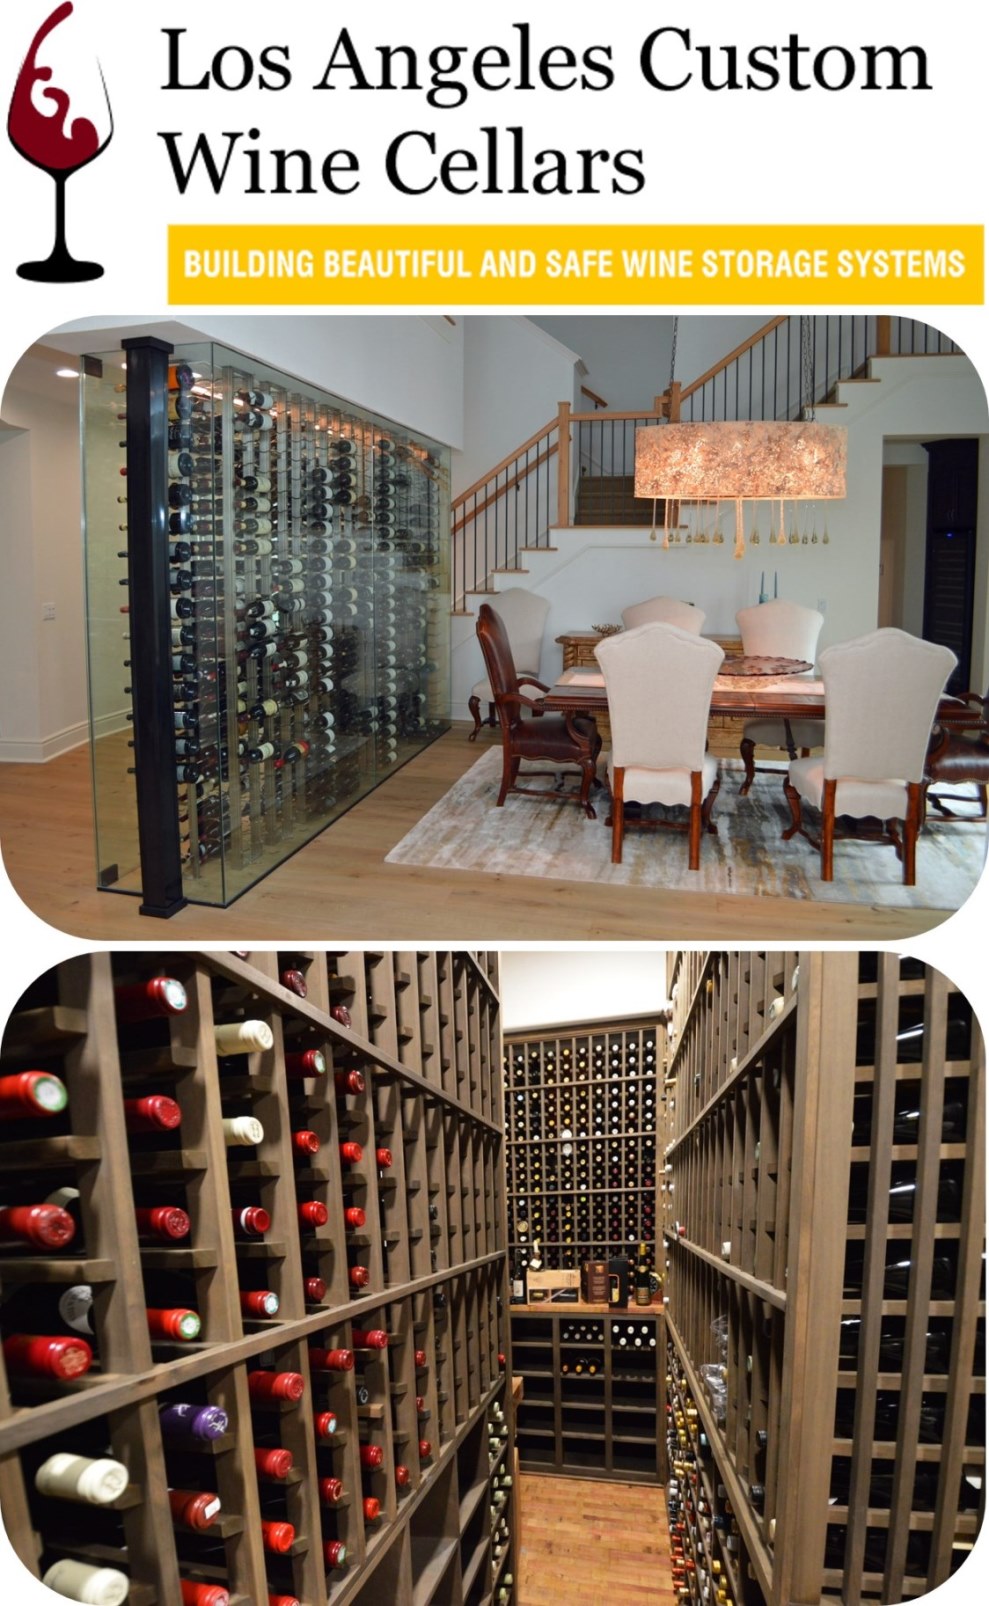 Let Our Master Wine Cellar Builder Design and Install Luxurious Wine Racks for Your Home or Business